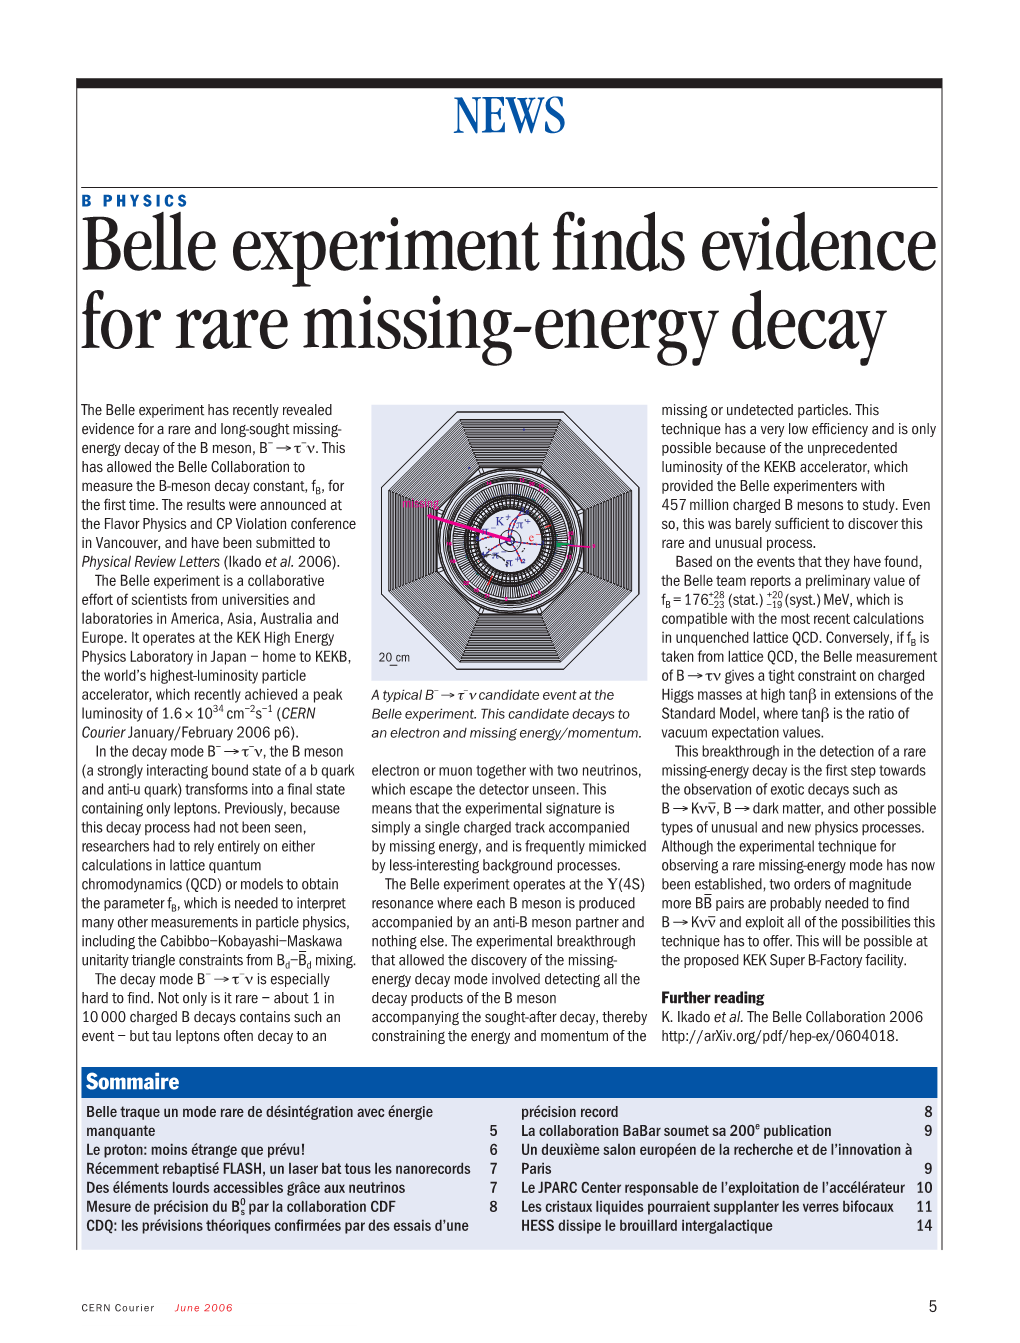 Belle Experiment Finds Evidence for Rare Missing-Energy Decay